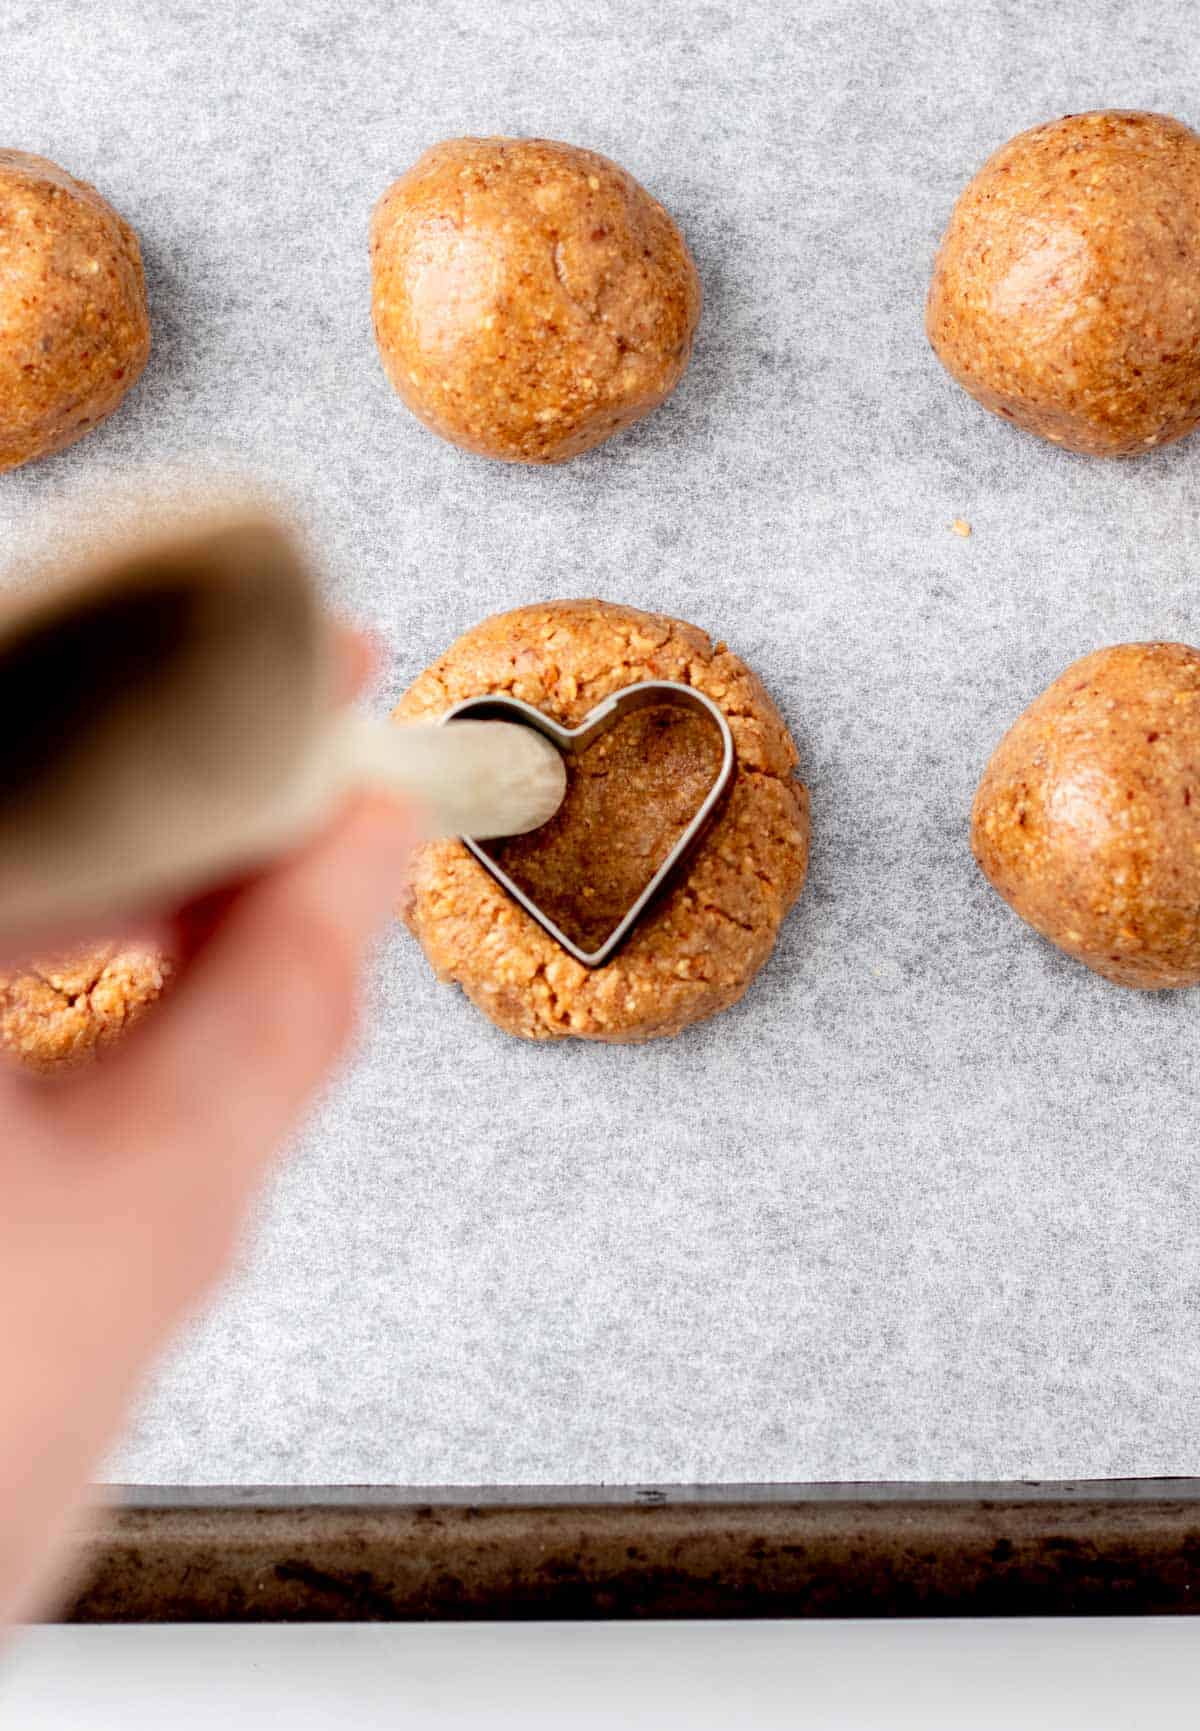 Balls of dough on a cookie sheet with a heart shaped cookie cutter in one of the dough balls.